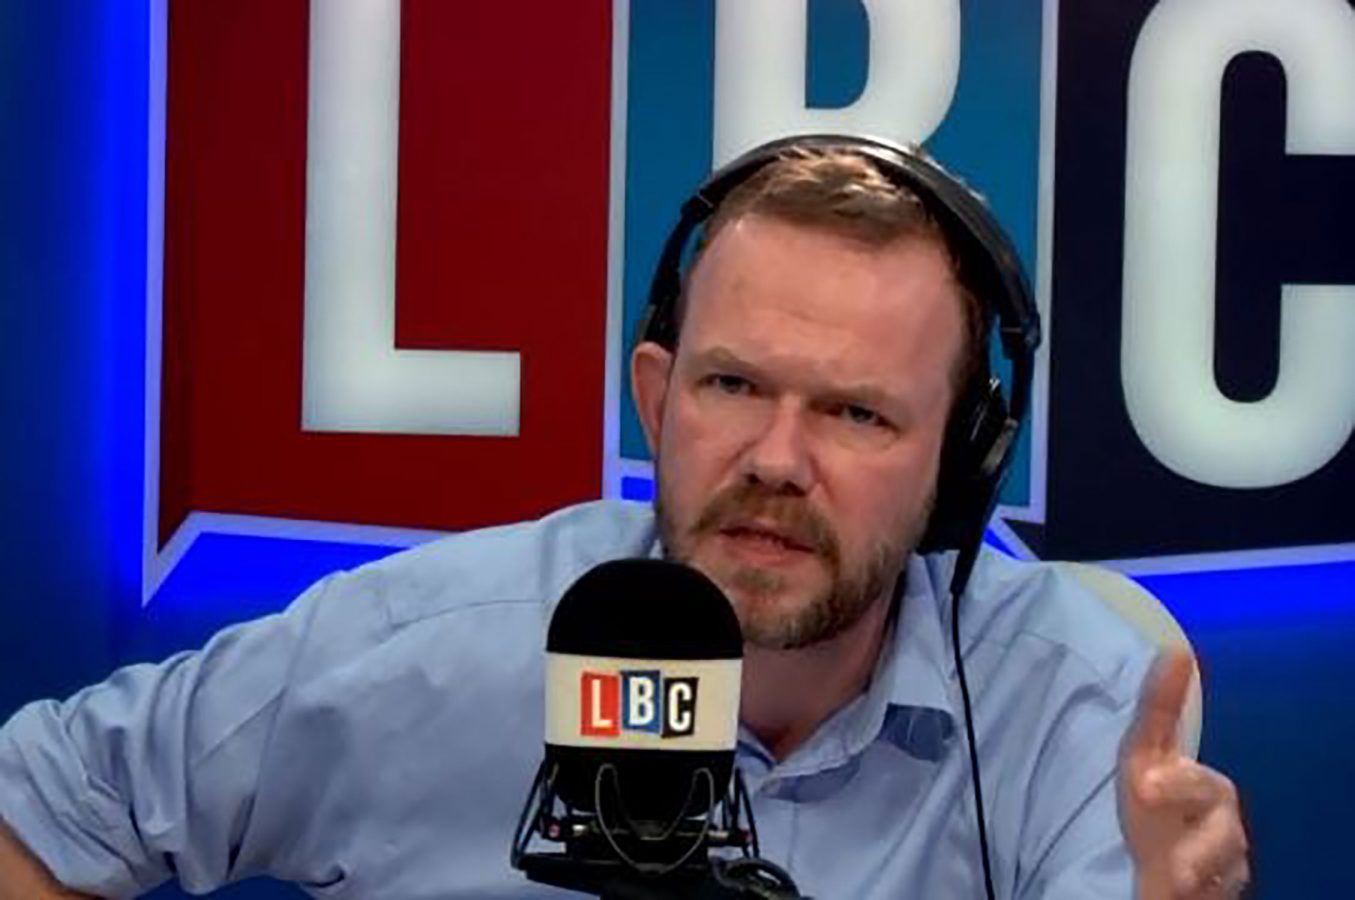 James O’Brien tears into Priti Patel for going to Poland to ‘pretend’ that she cares about refugees